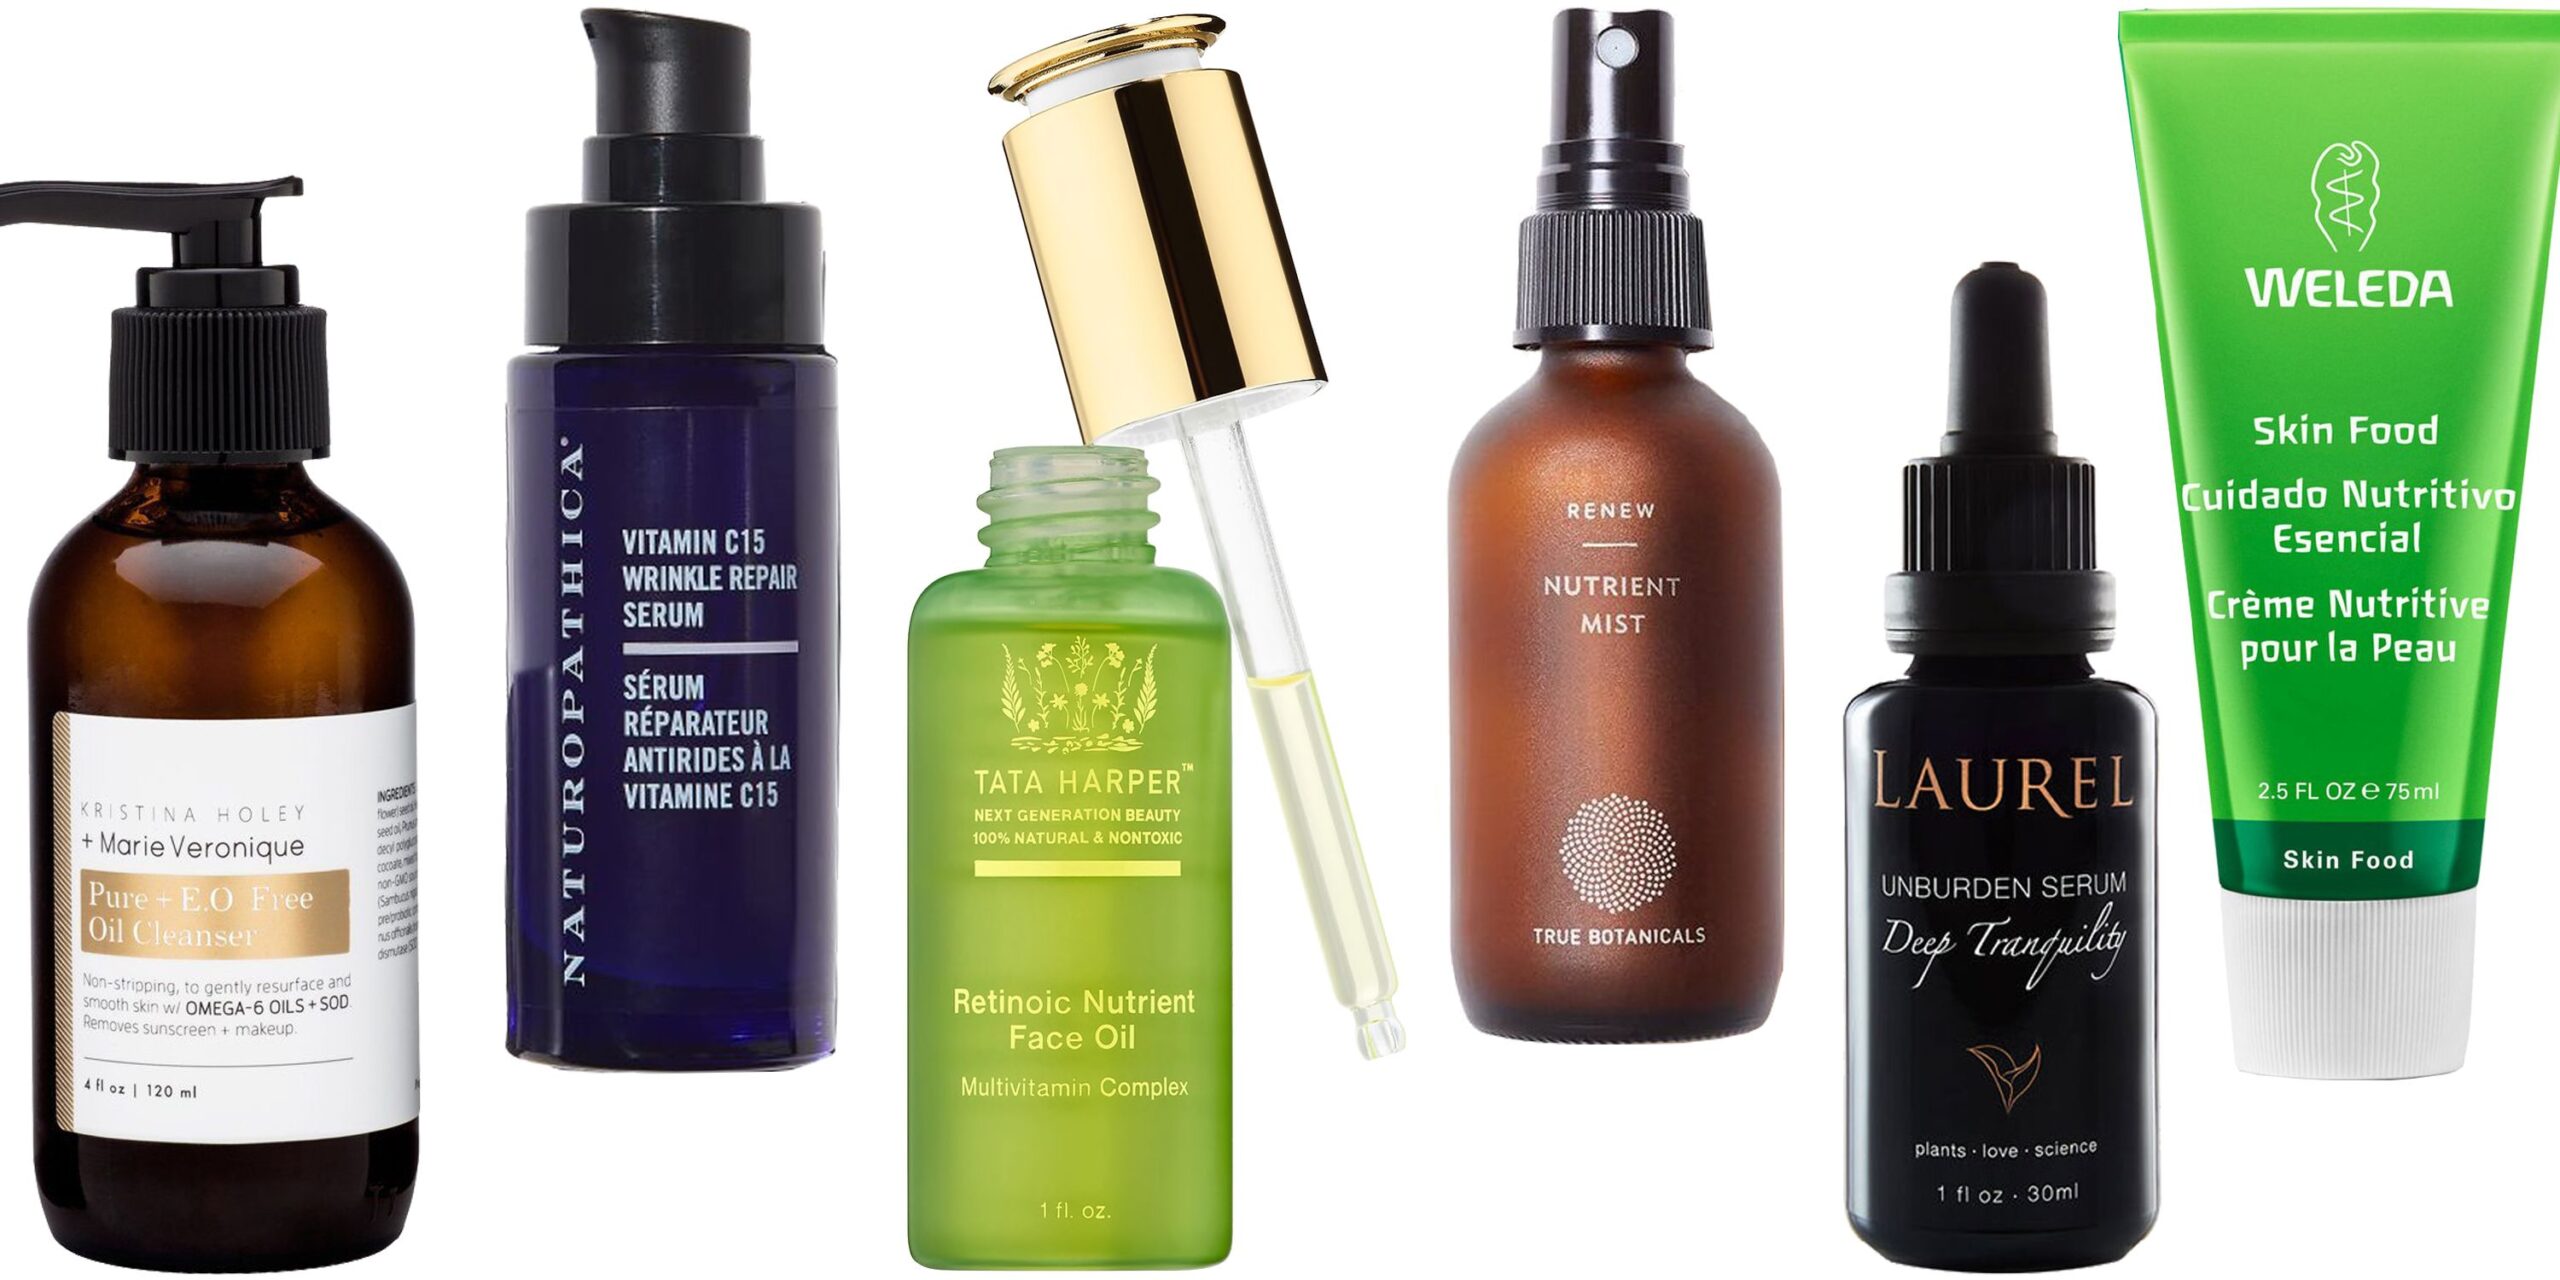 Clean Beauty: The Rise Of Organic And Natural Skin Care